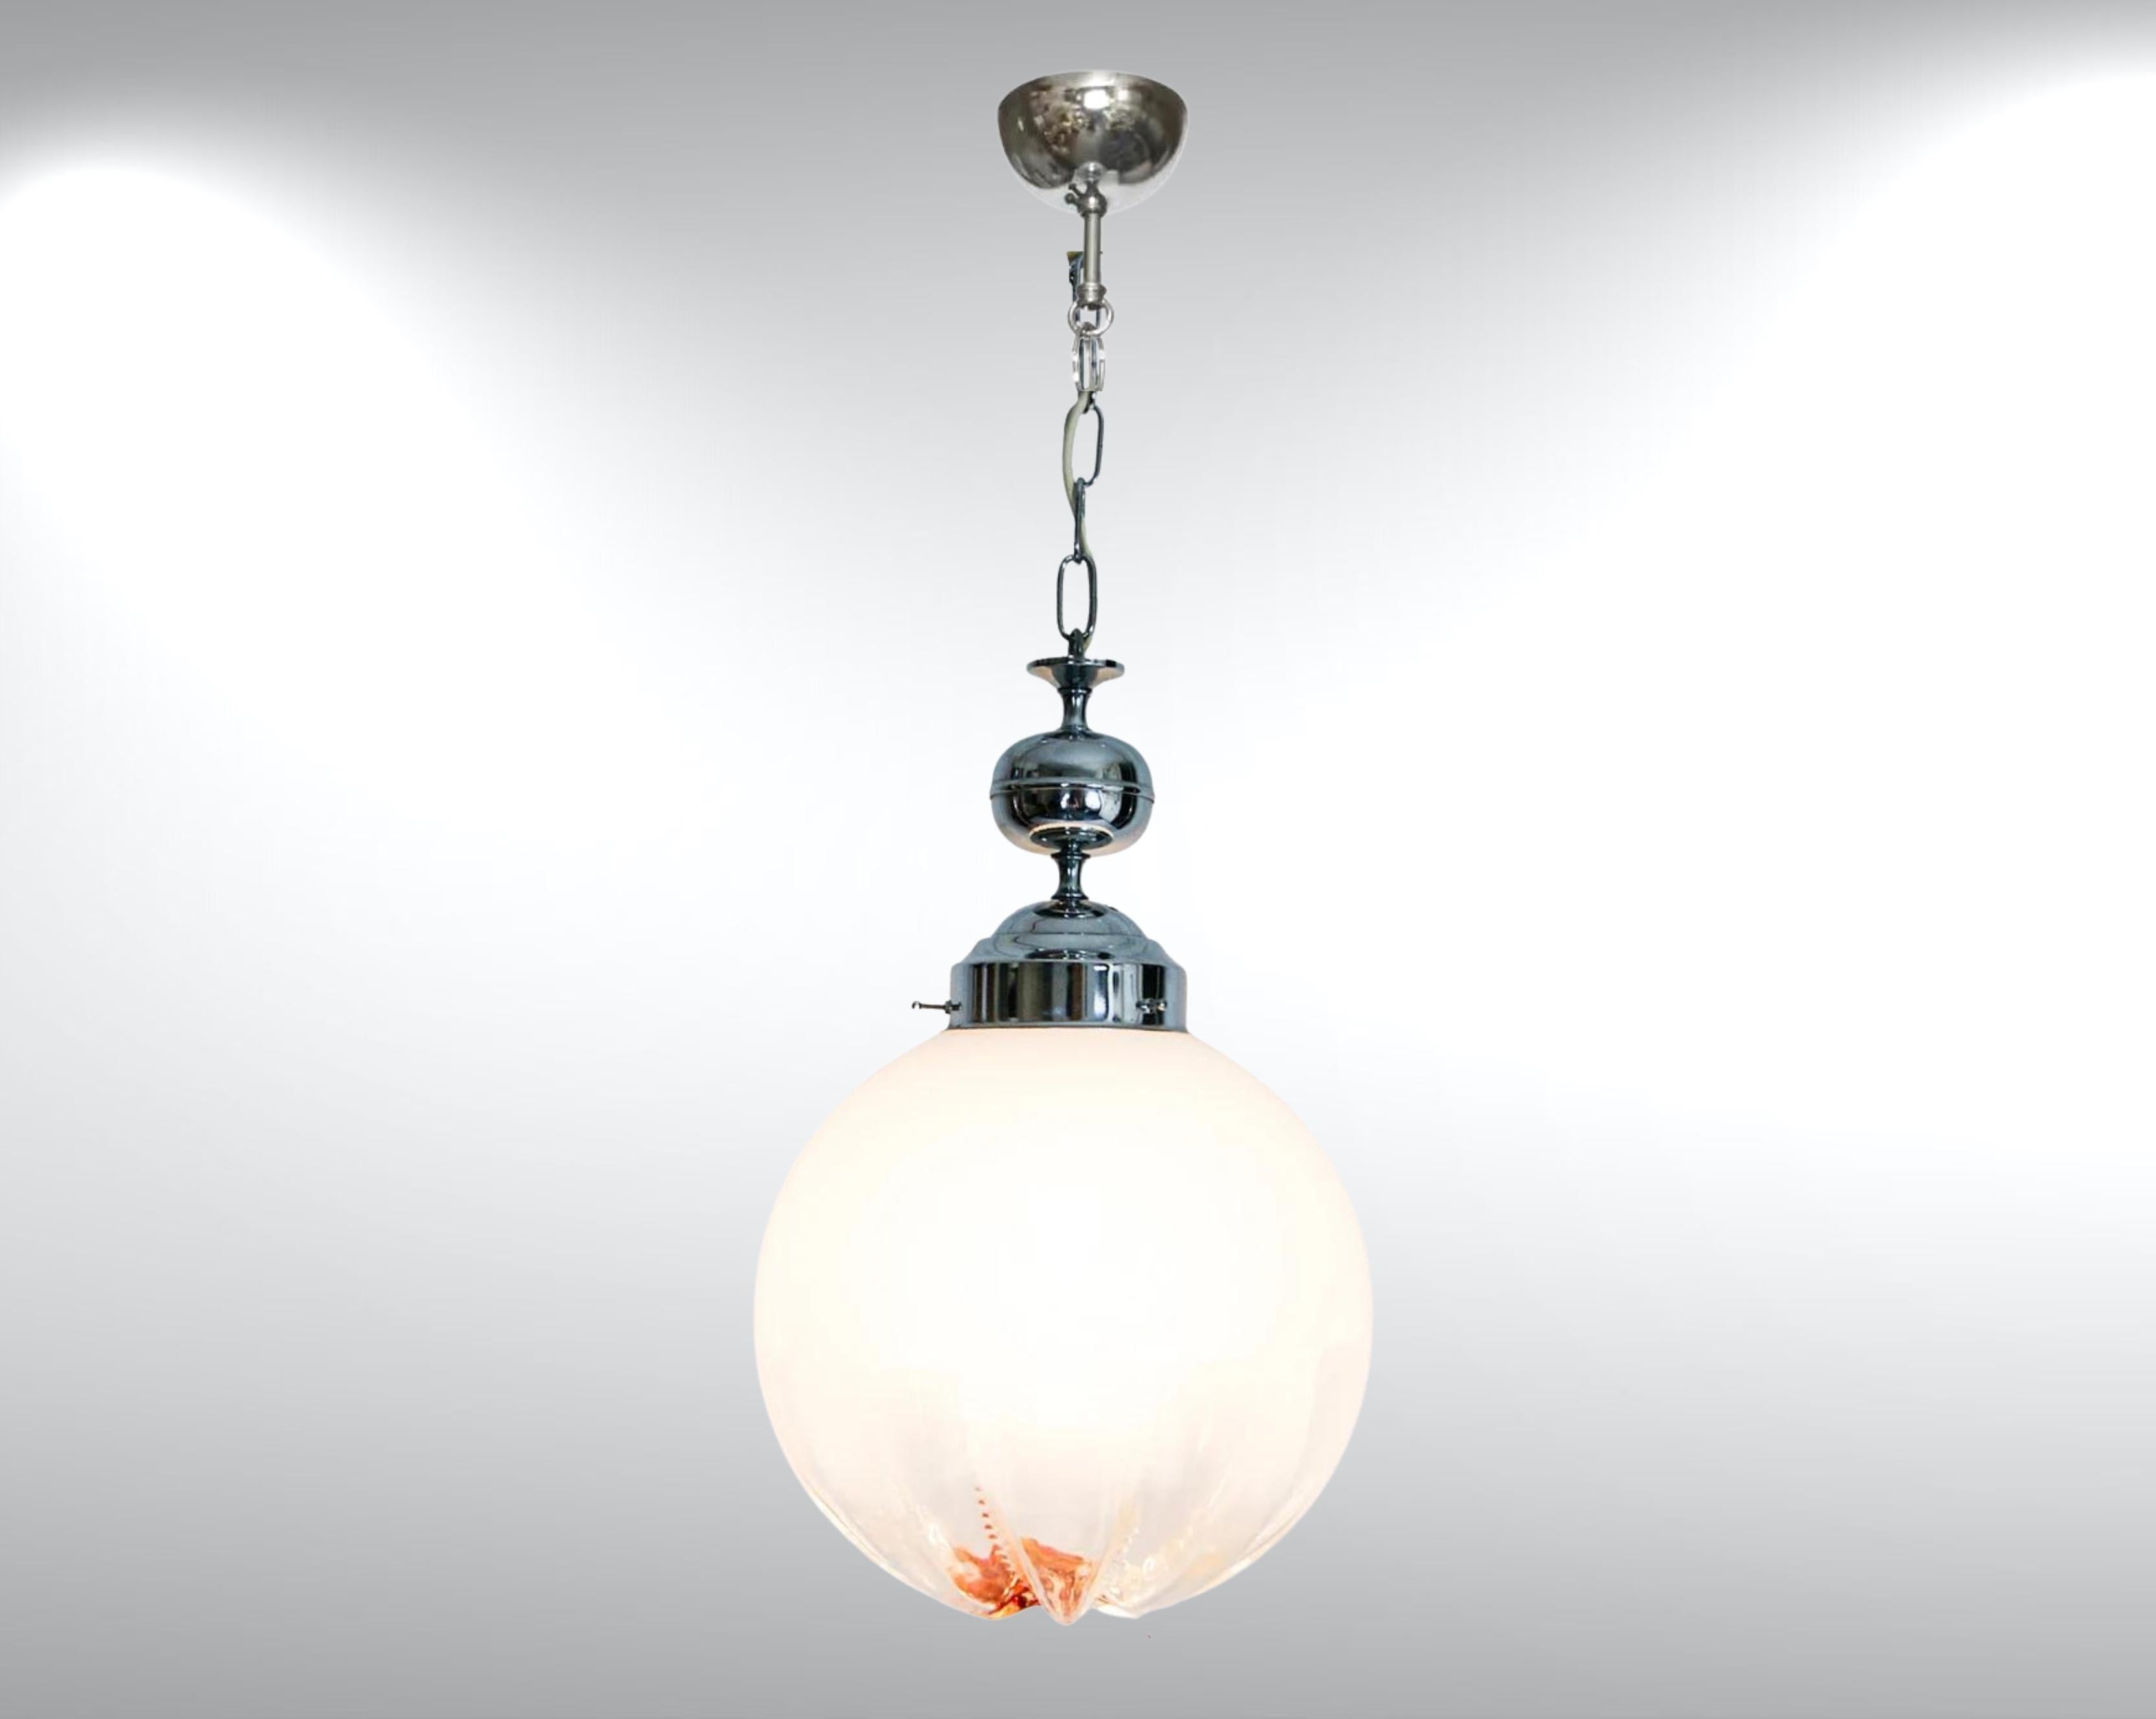 Murano glass ceiling pendant lamp by Mazzega circa 1960s.
Attributed to Toni Zuccheri.
Large sized sommerso glass globe diffuser. 
The colouring ranges from a gradient milky white to clear glass towards the base, then an intense splash of amber